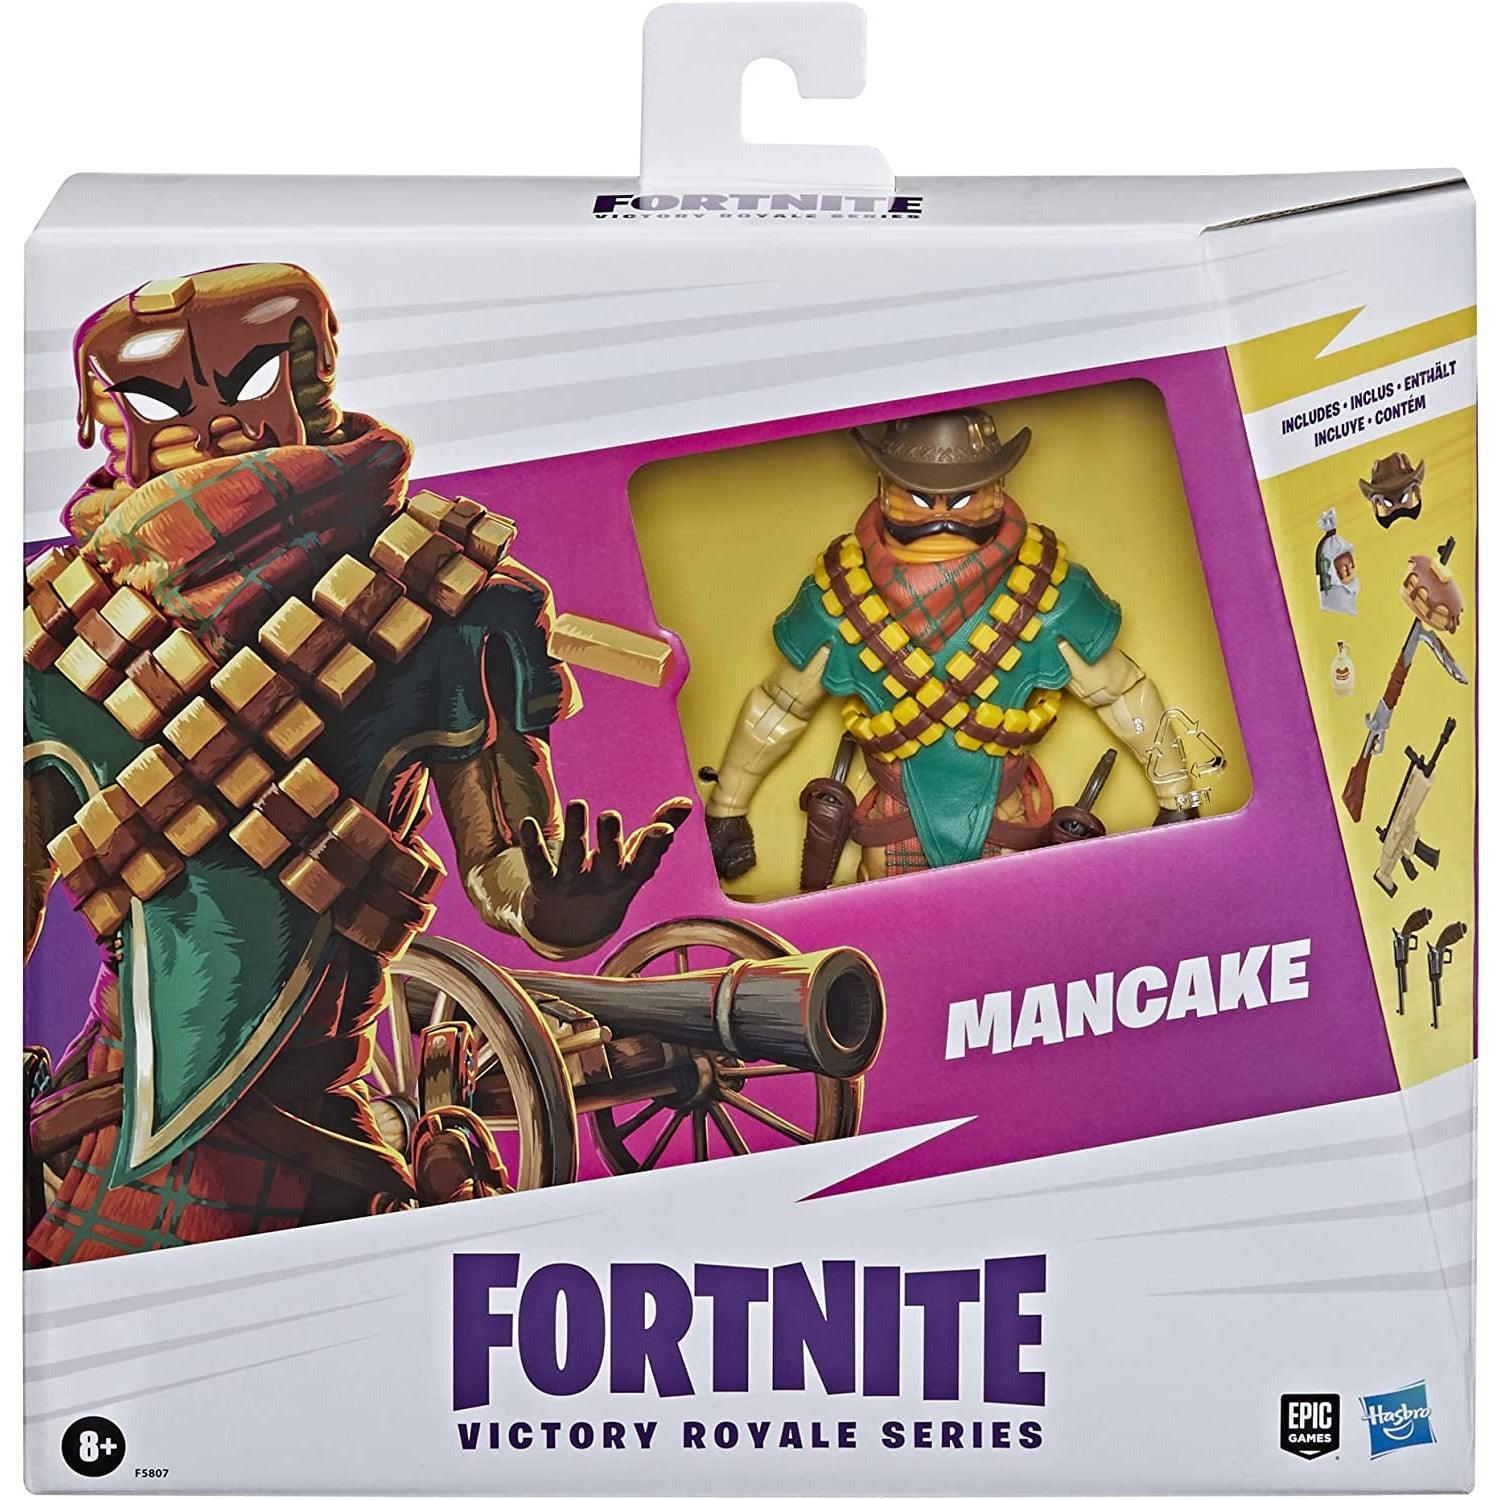 FORTNITE Hasbro Victory Royale Series Mancake Deluxe Pack Collectible Action Figure with Accessories - Ages 8 and Up, 6-inch